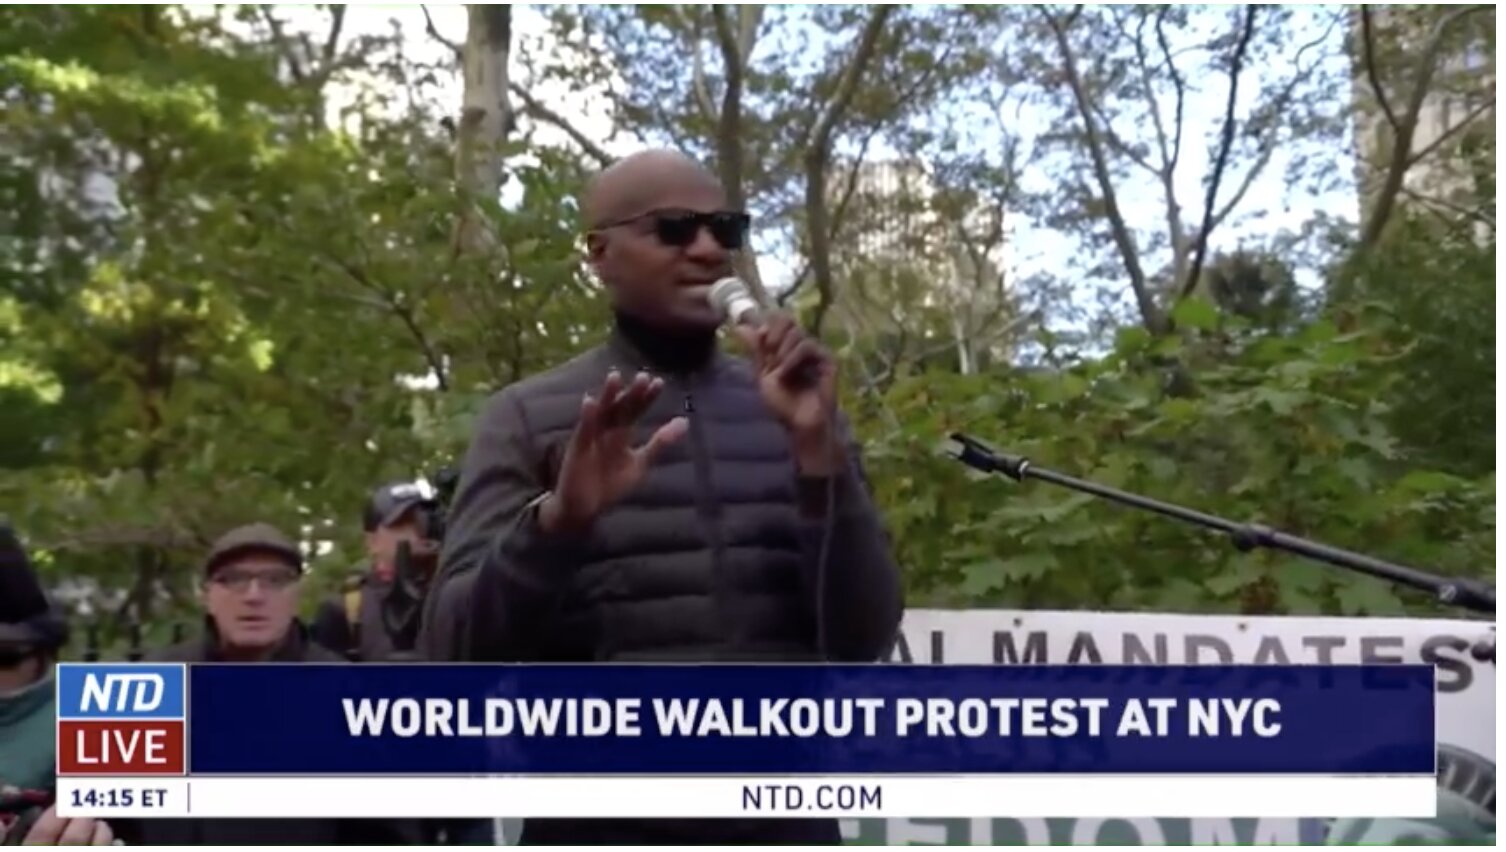 LIVE: Worldwide Walkout Protest at NYC